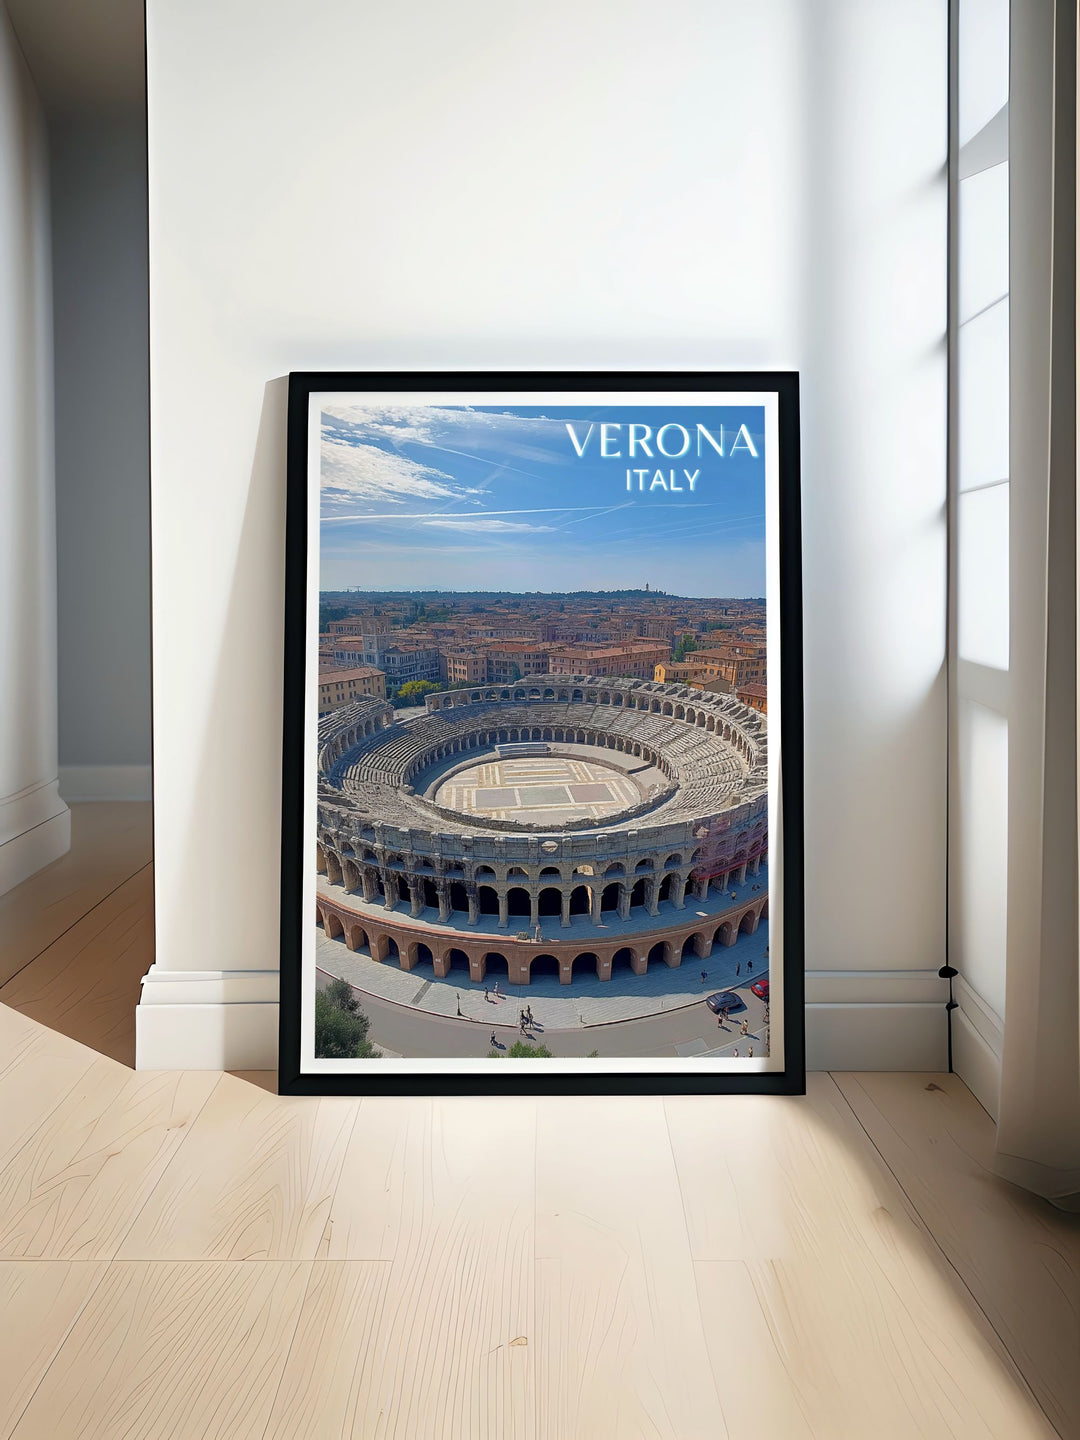 Stunning view of Arena de Verona in Italy captured in a beautiful Italy travel print perfect for home decor or as a unique Verona gift showcasing the historic charm and architectural beauty of this ancient Roman amphitheater.